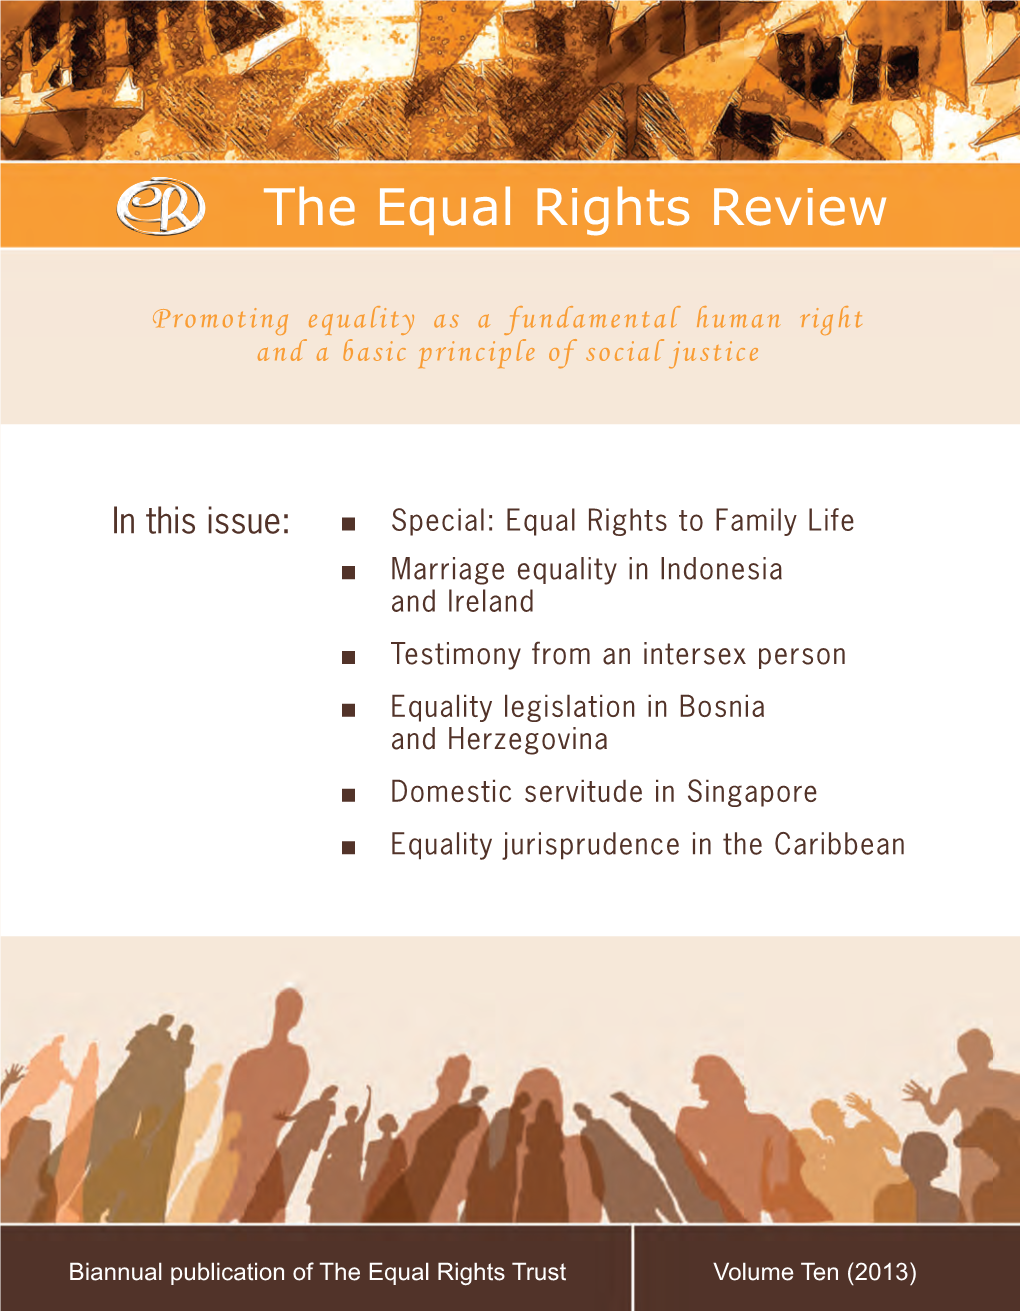 The Equal Rights Review